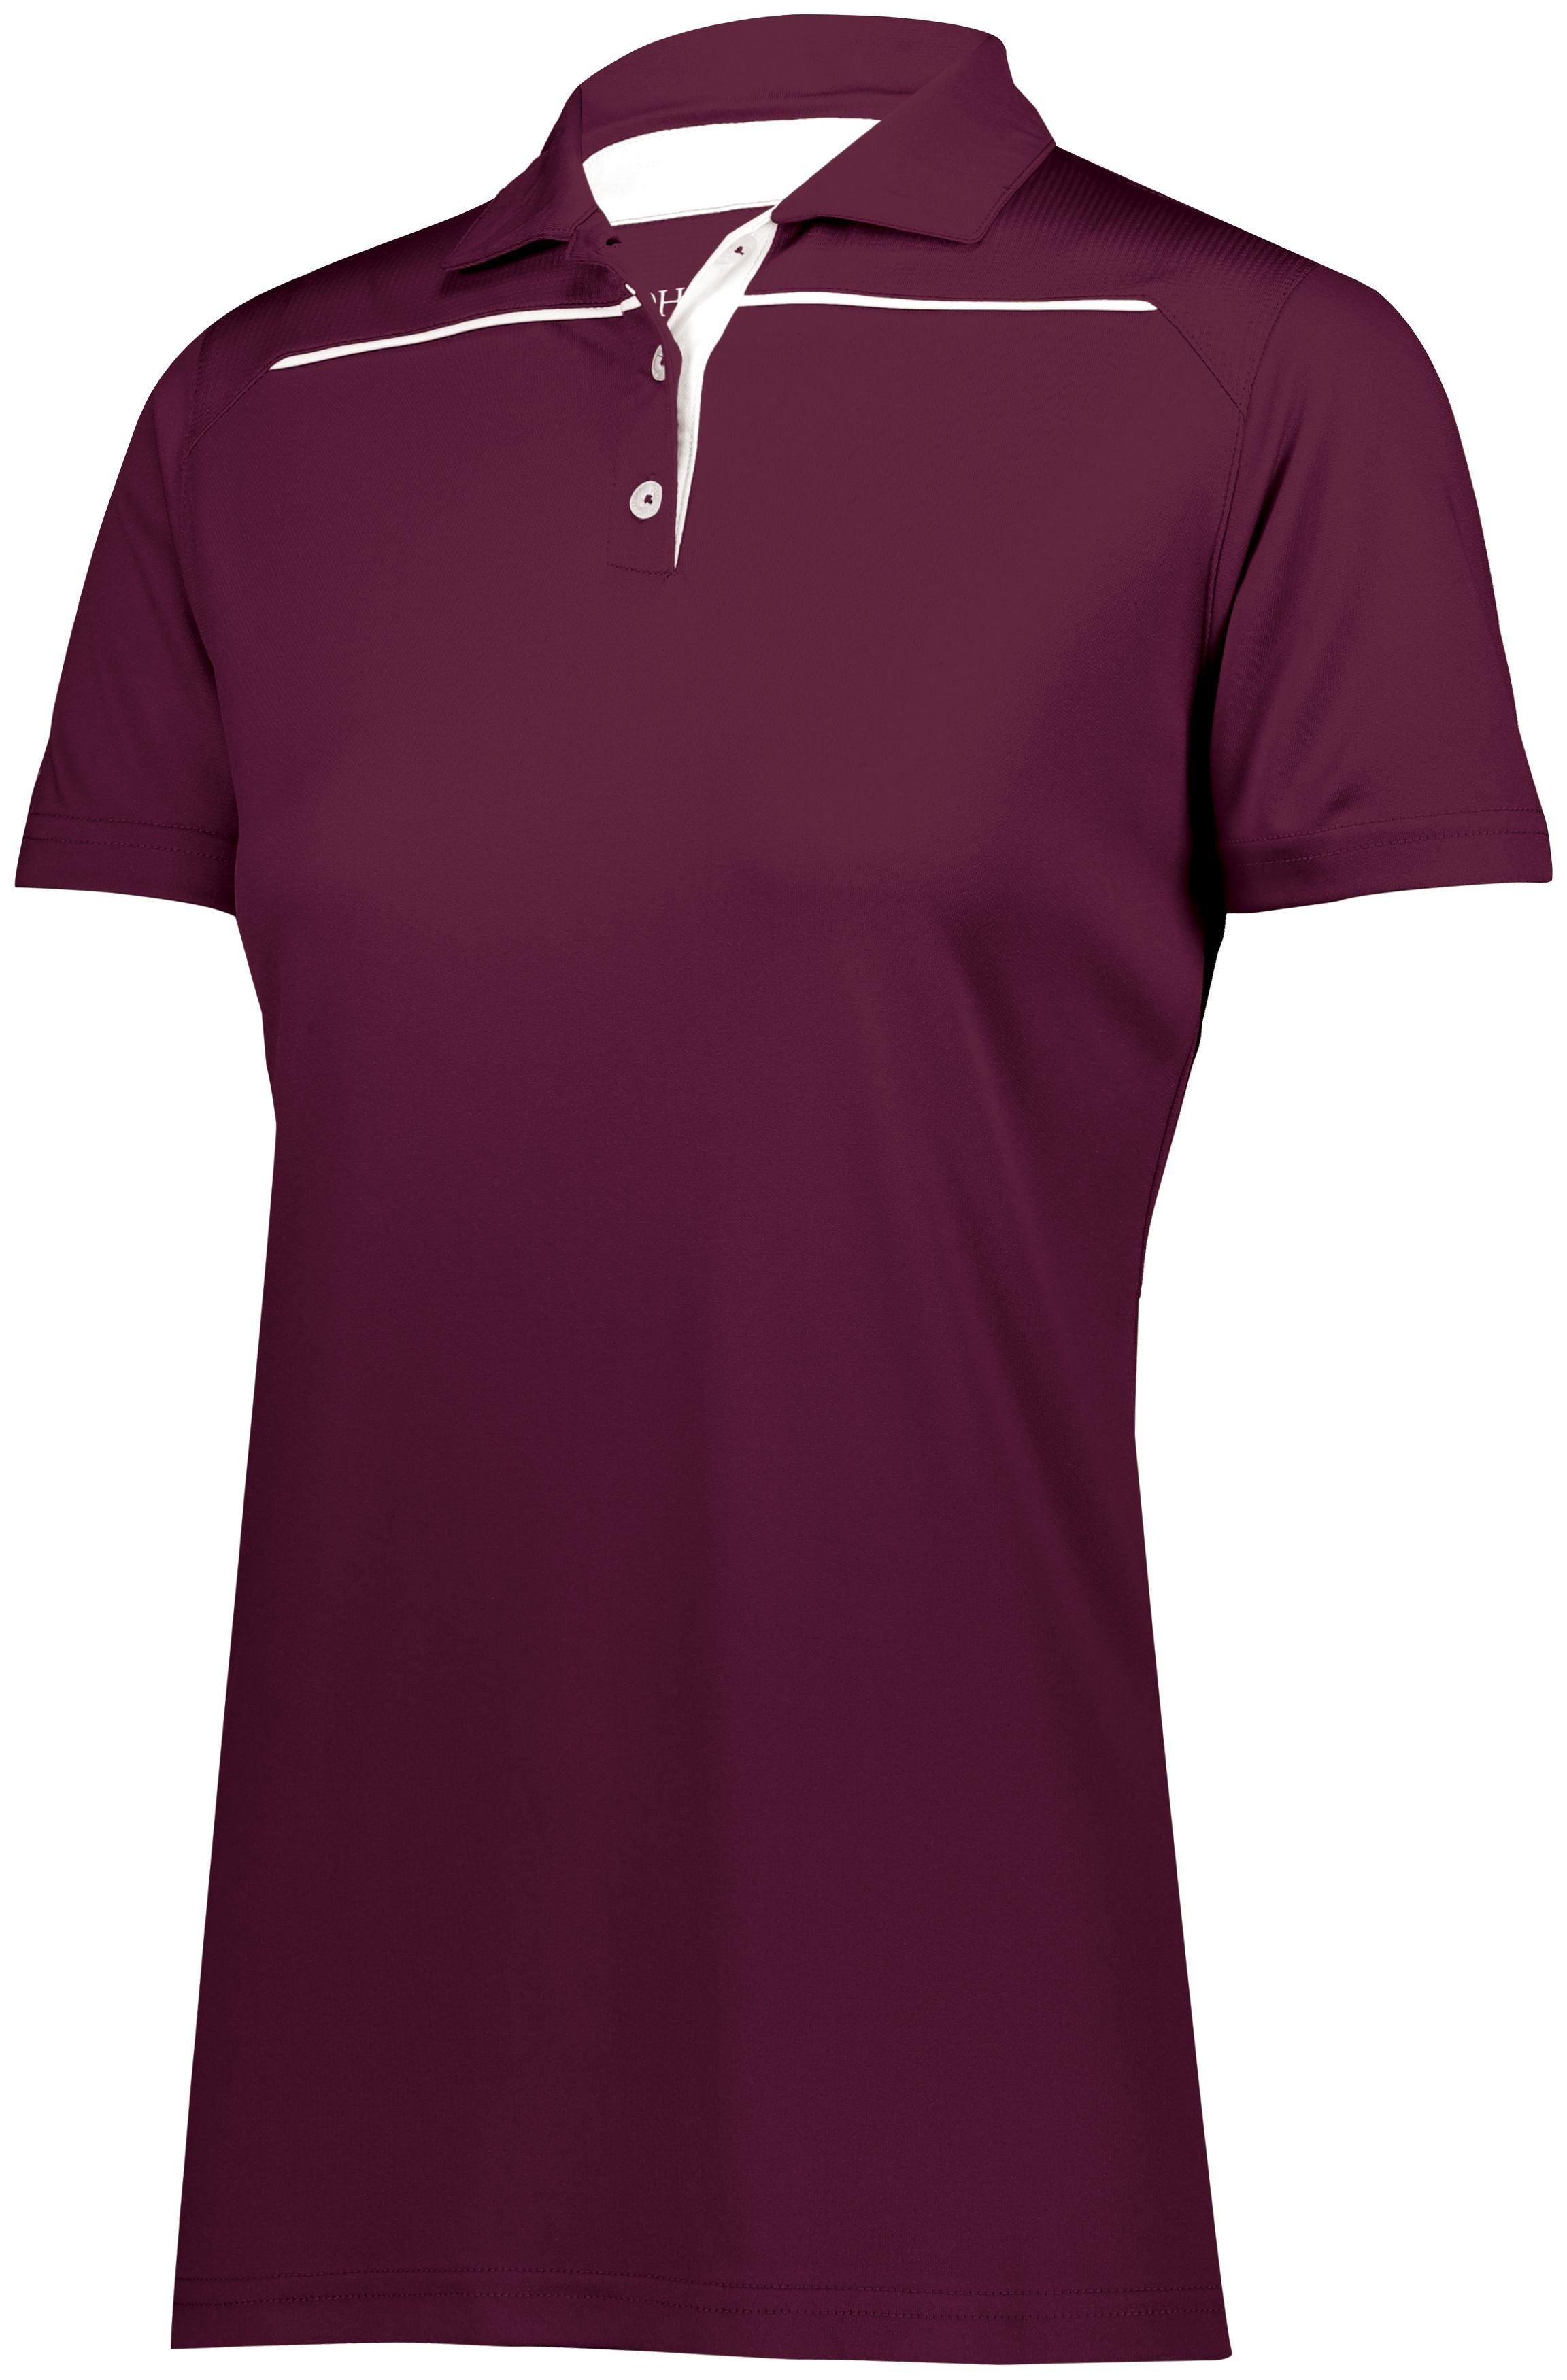 Holloway Ladies Defer Polo in Maroon/White  -Part of the Ladies, Ladies-Polo, Polos, Holloway, Shirts product lines at KanaleyCreations.com